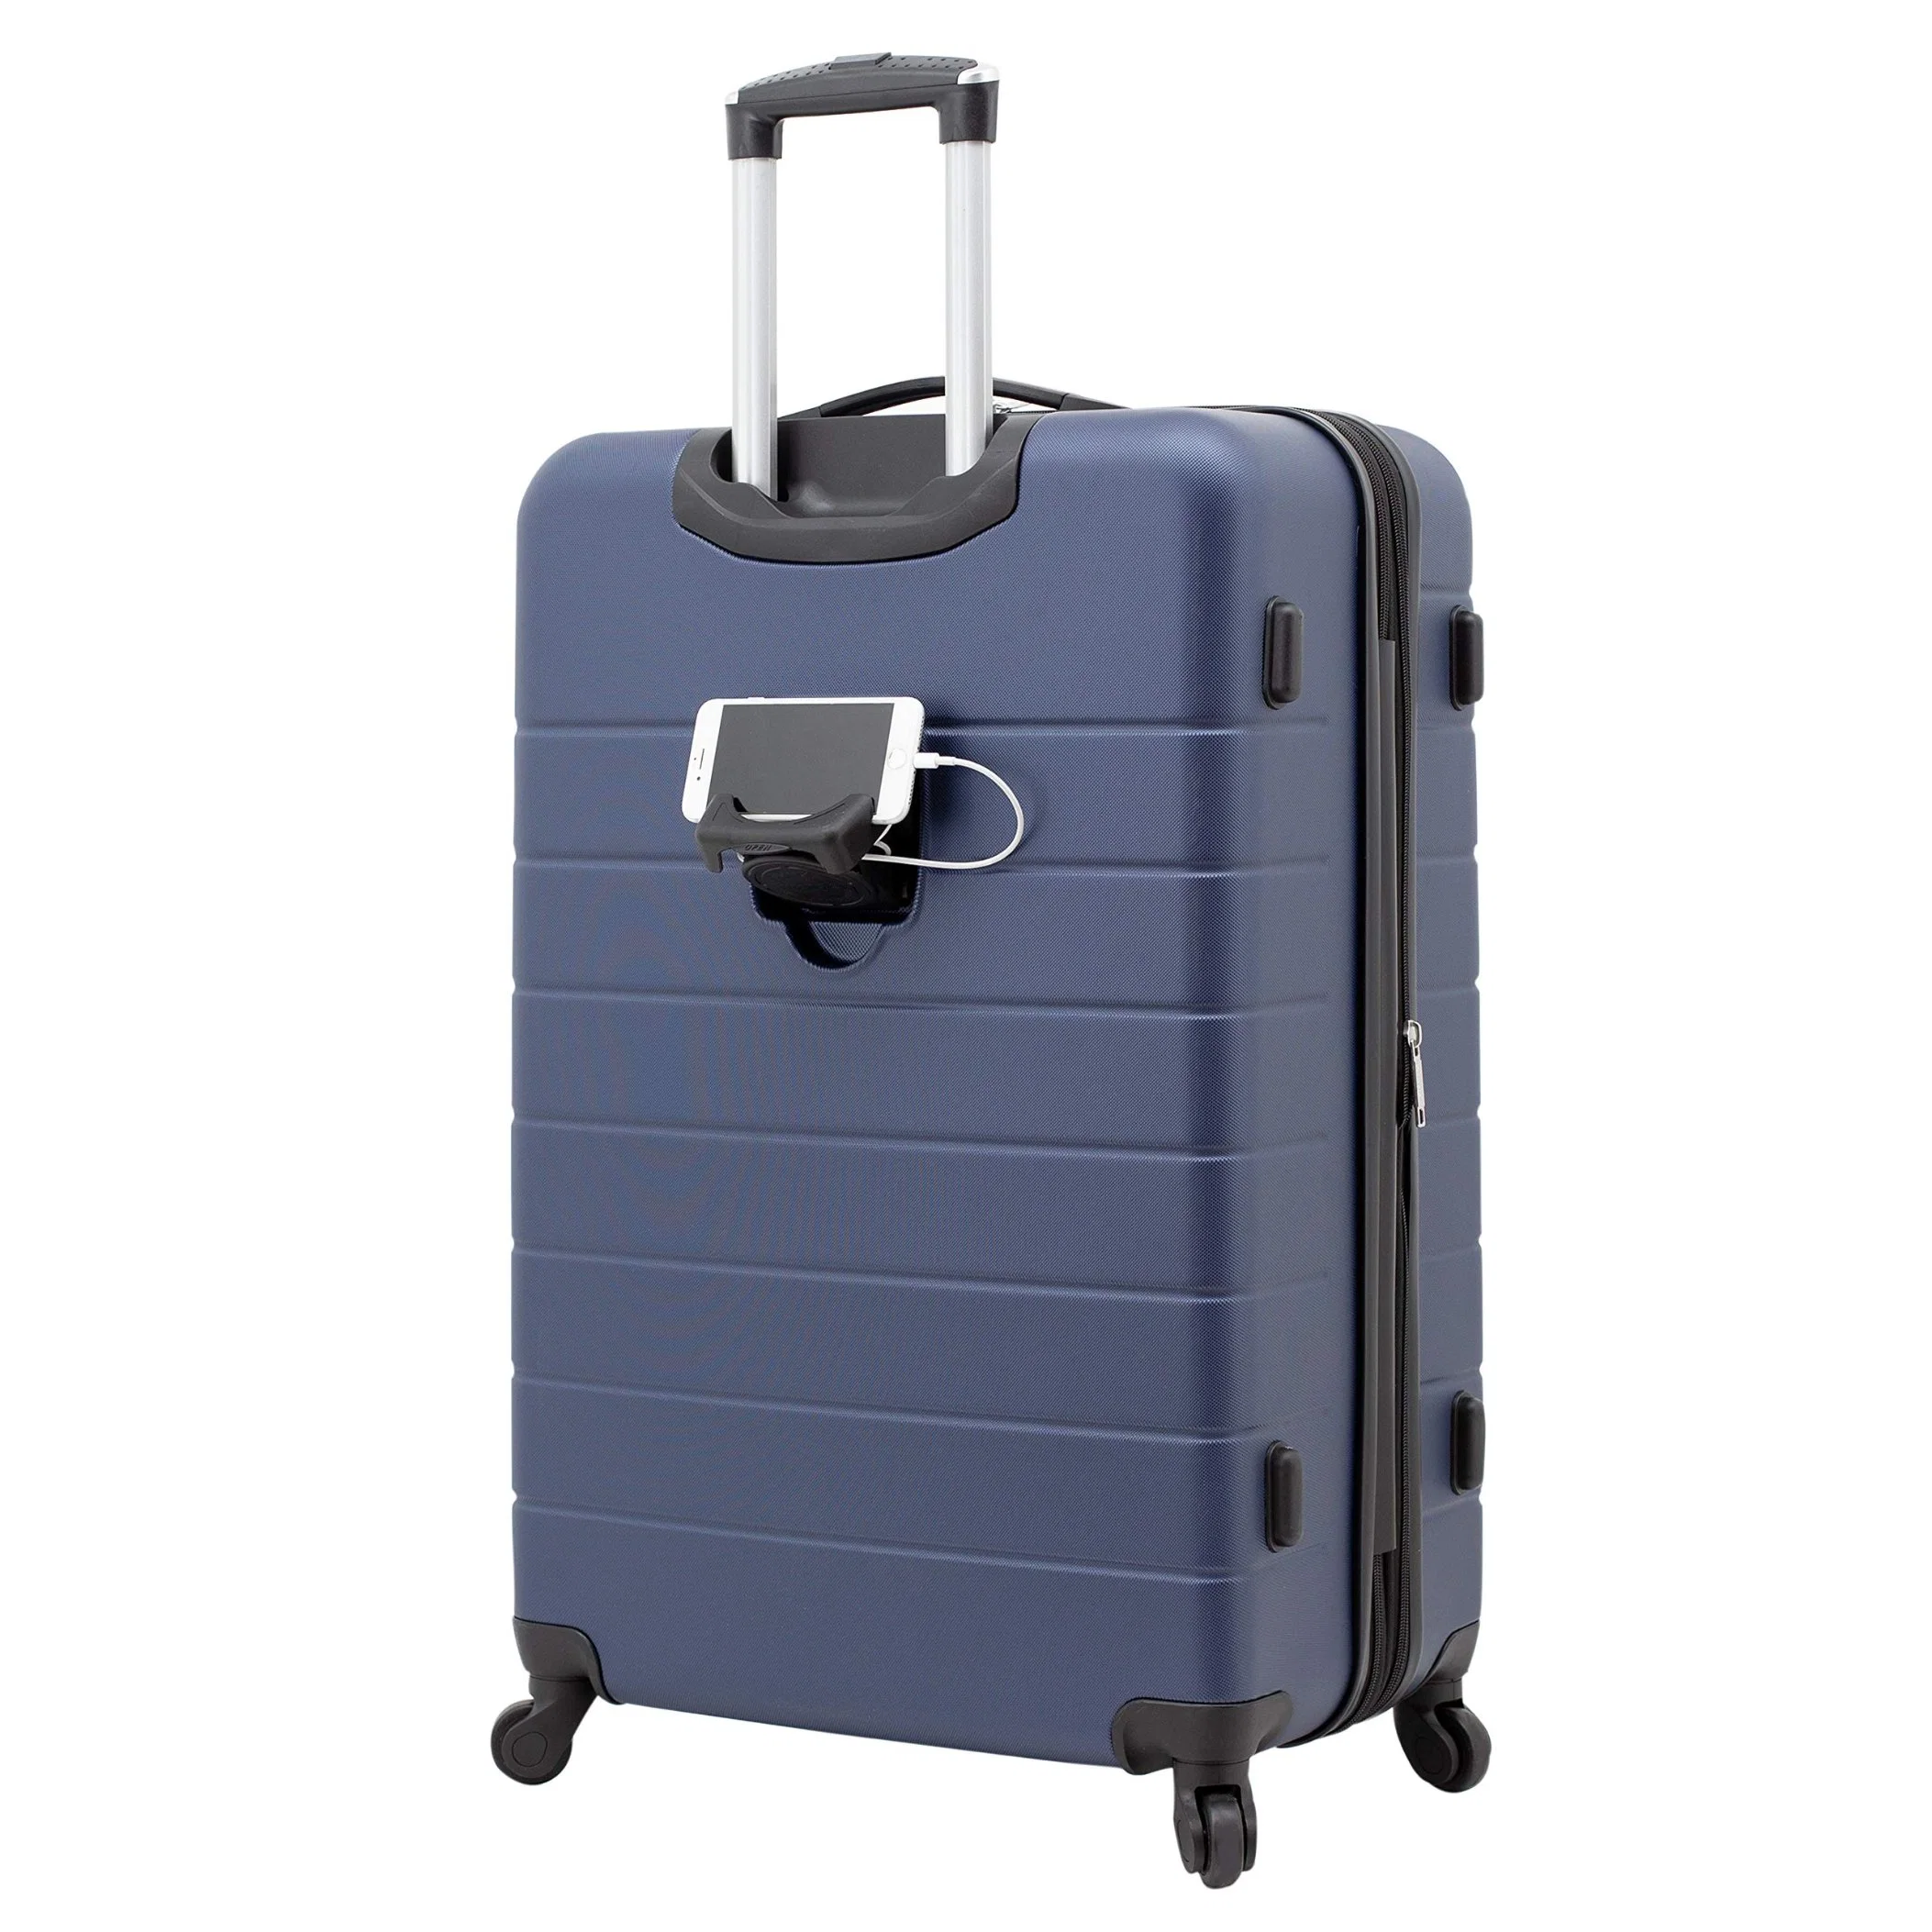 Smart Luggage Set with Cup Holder and USB Port Navy Blue Business Case Trolley Luggage School Bag